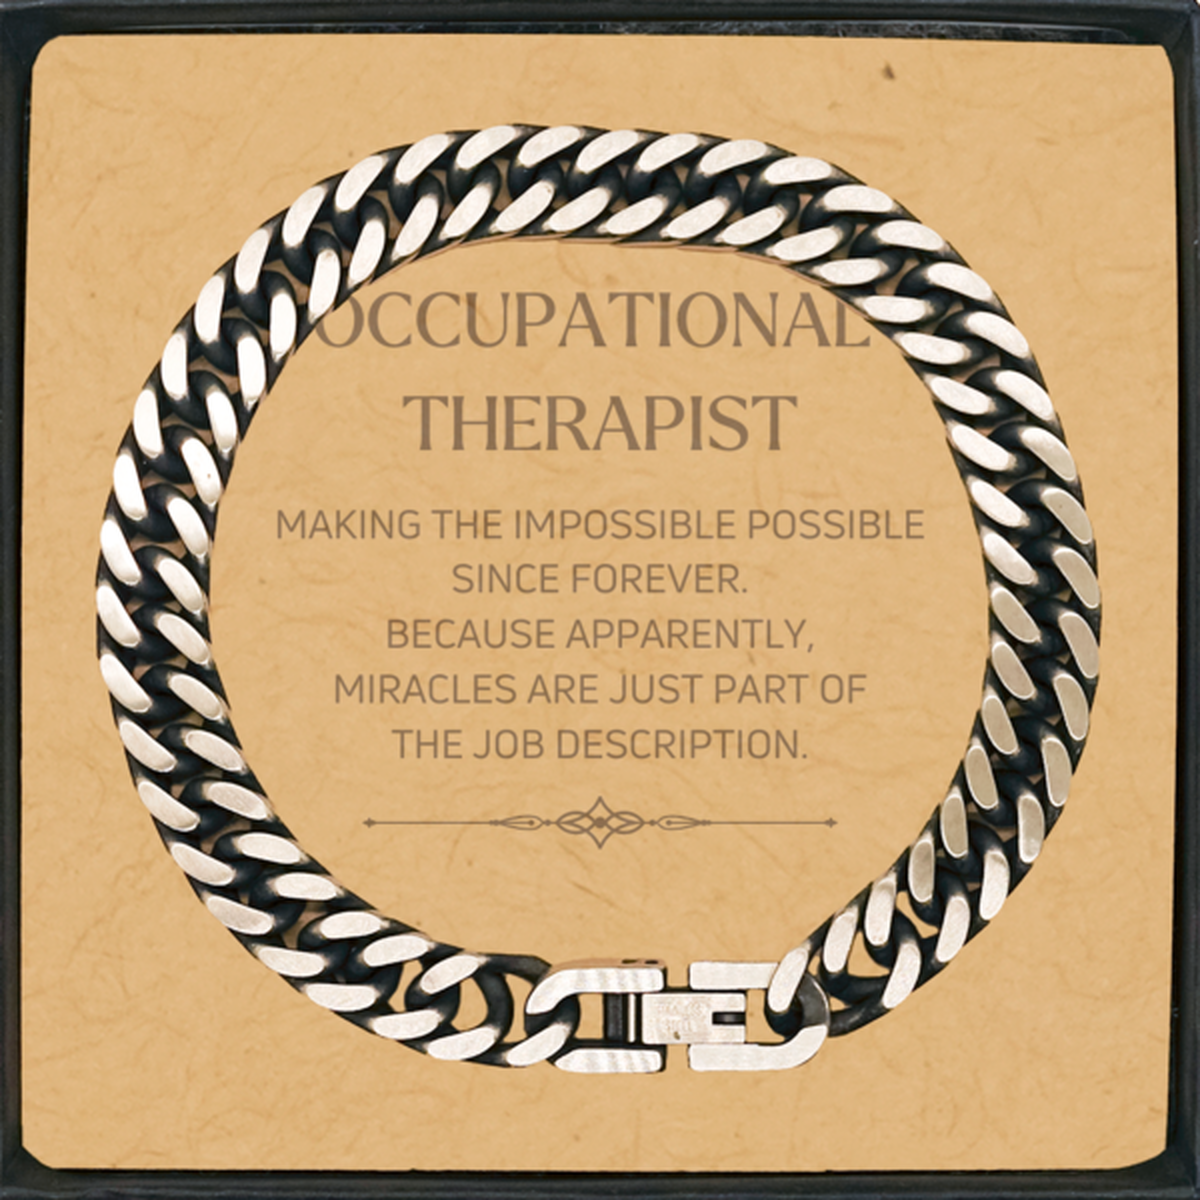 Funny Occupational Therapist Gifts, Miracles are just part of the job description, Inspirational Birthday Cuban Link Chain Bracelet For Occupational Therapist, Men, Women, Coworkers, Friends, Boss